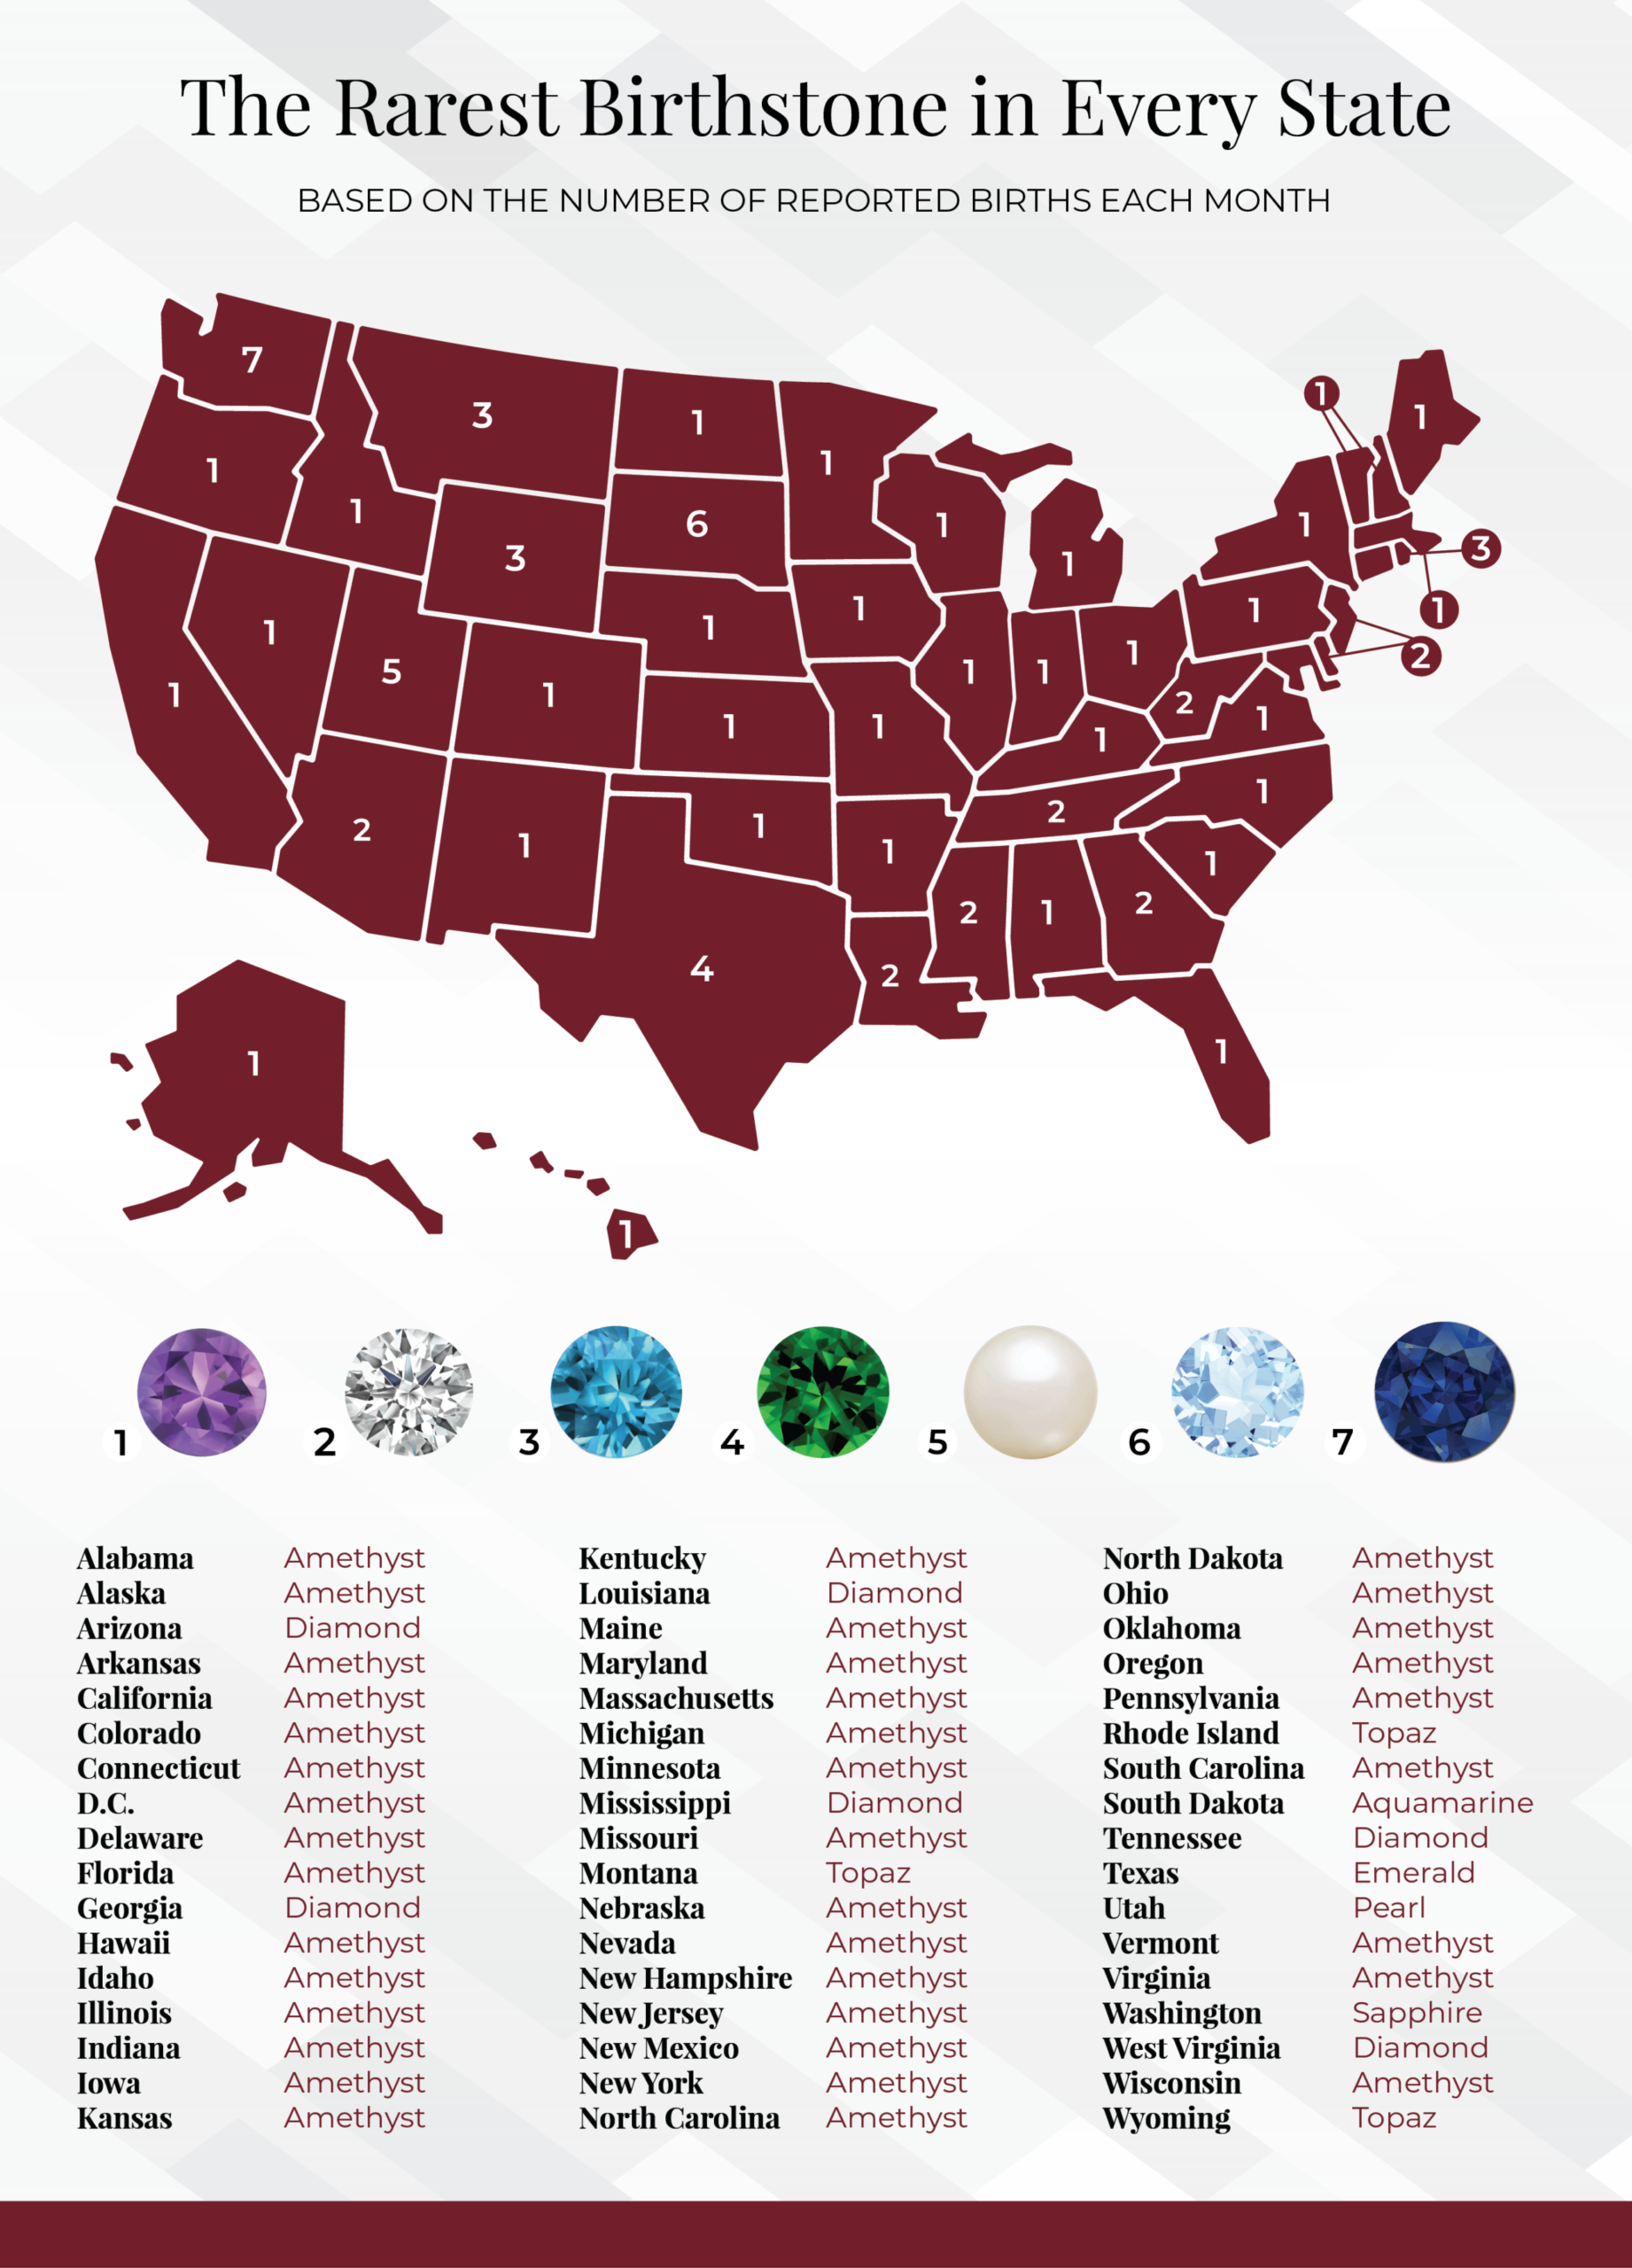 U.S. map showing the rarest birthstone in each state.
